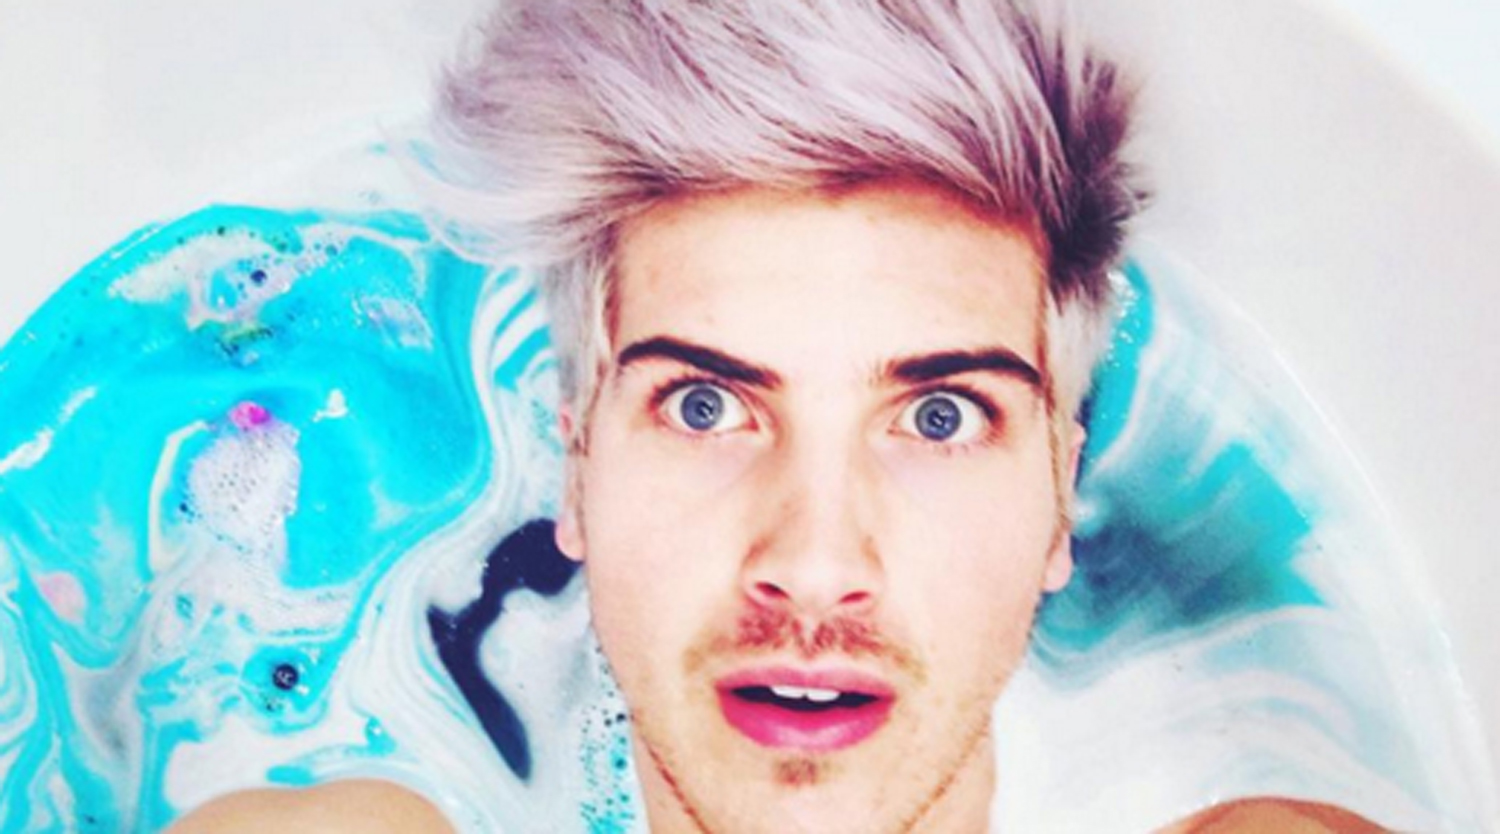 Joey Graceffa just debuted his new blue hair color in his latest video uplo...